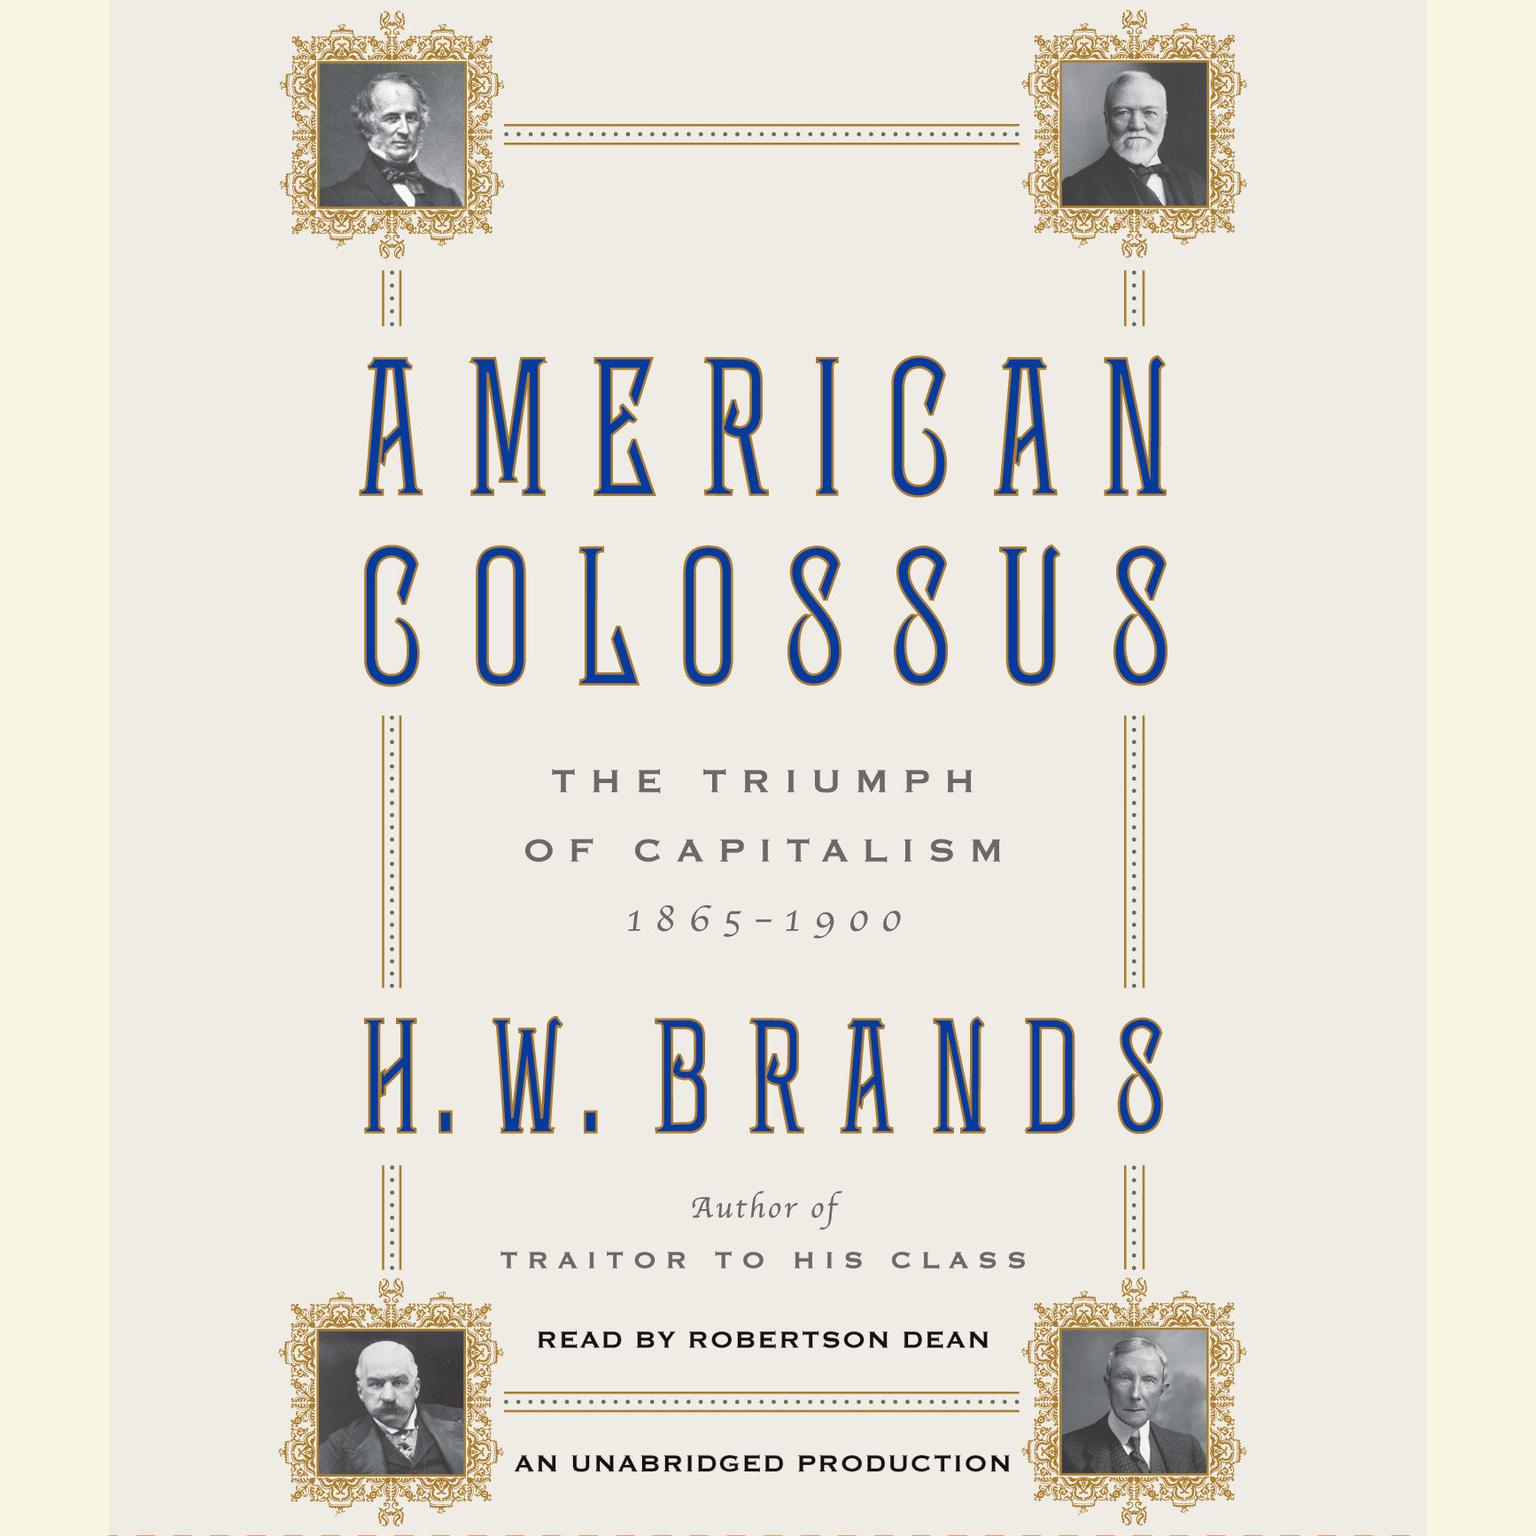 American Colossus: The Triumph of Capitalism, 1865-1900 Audiobook, by H. W. Brands